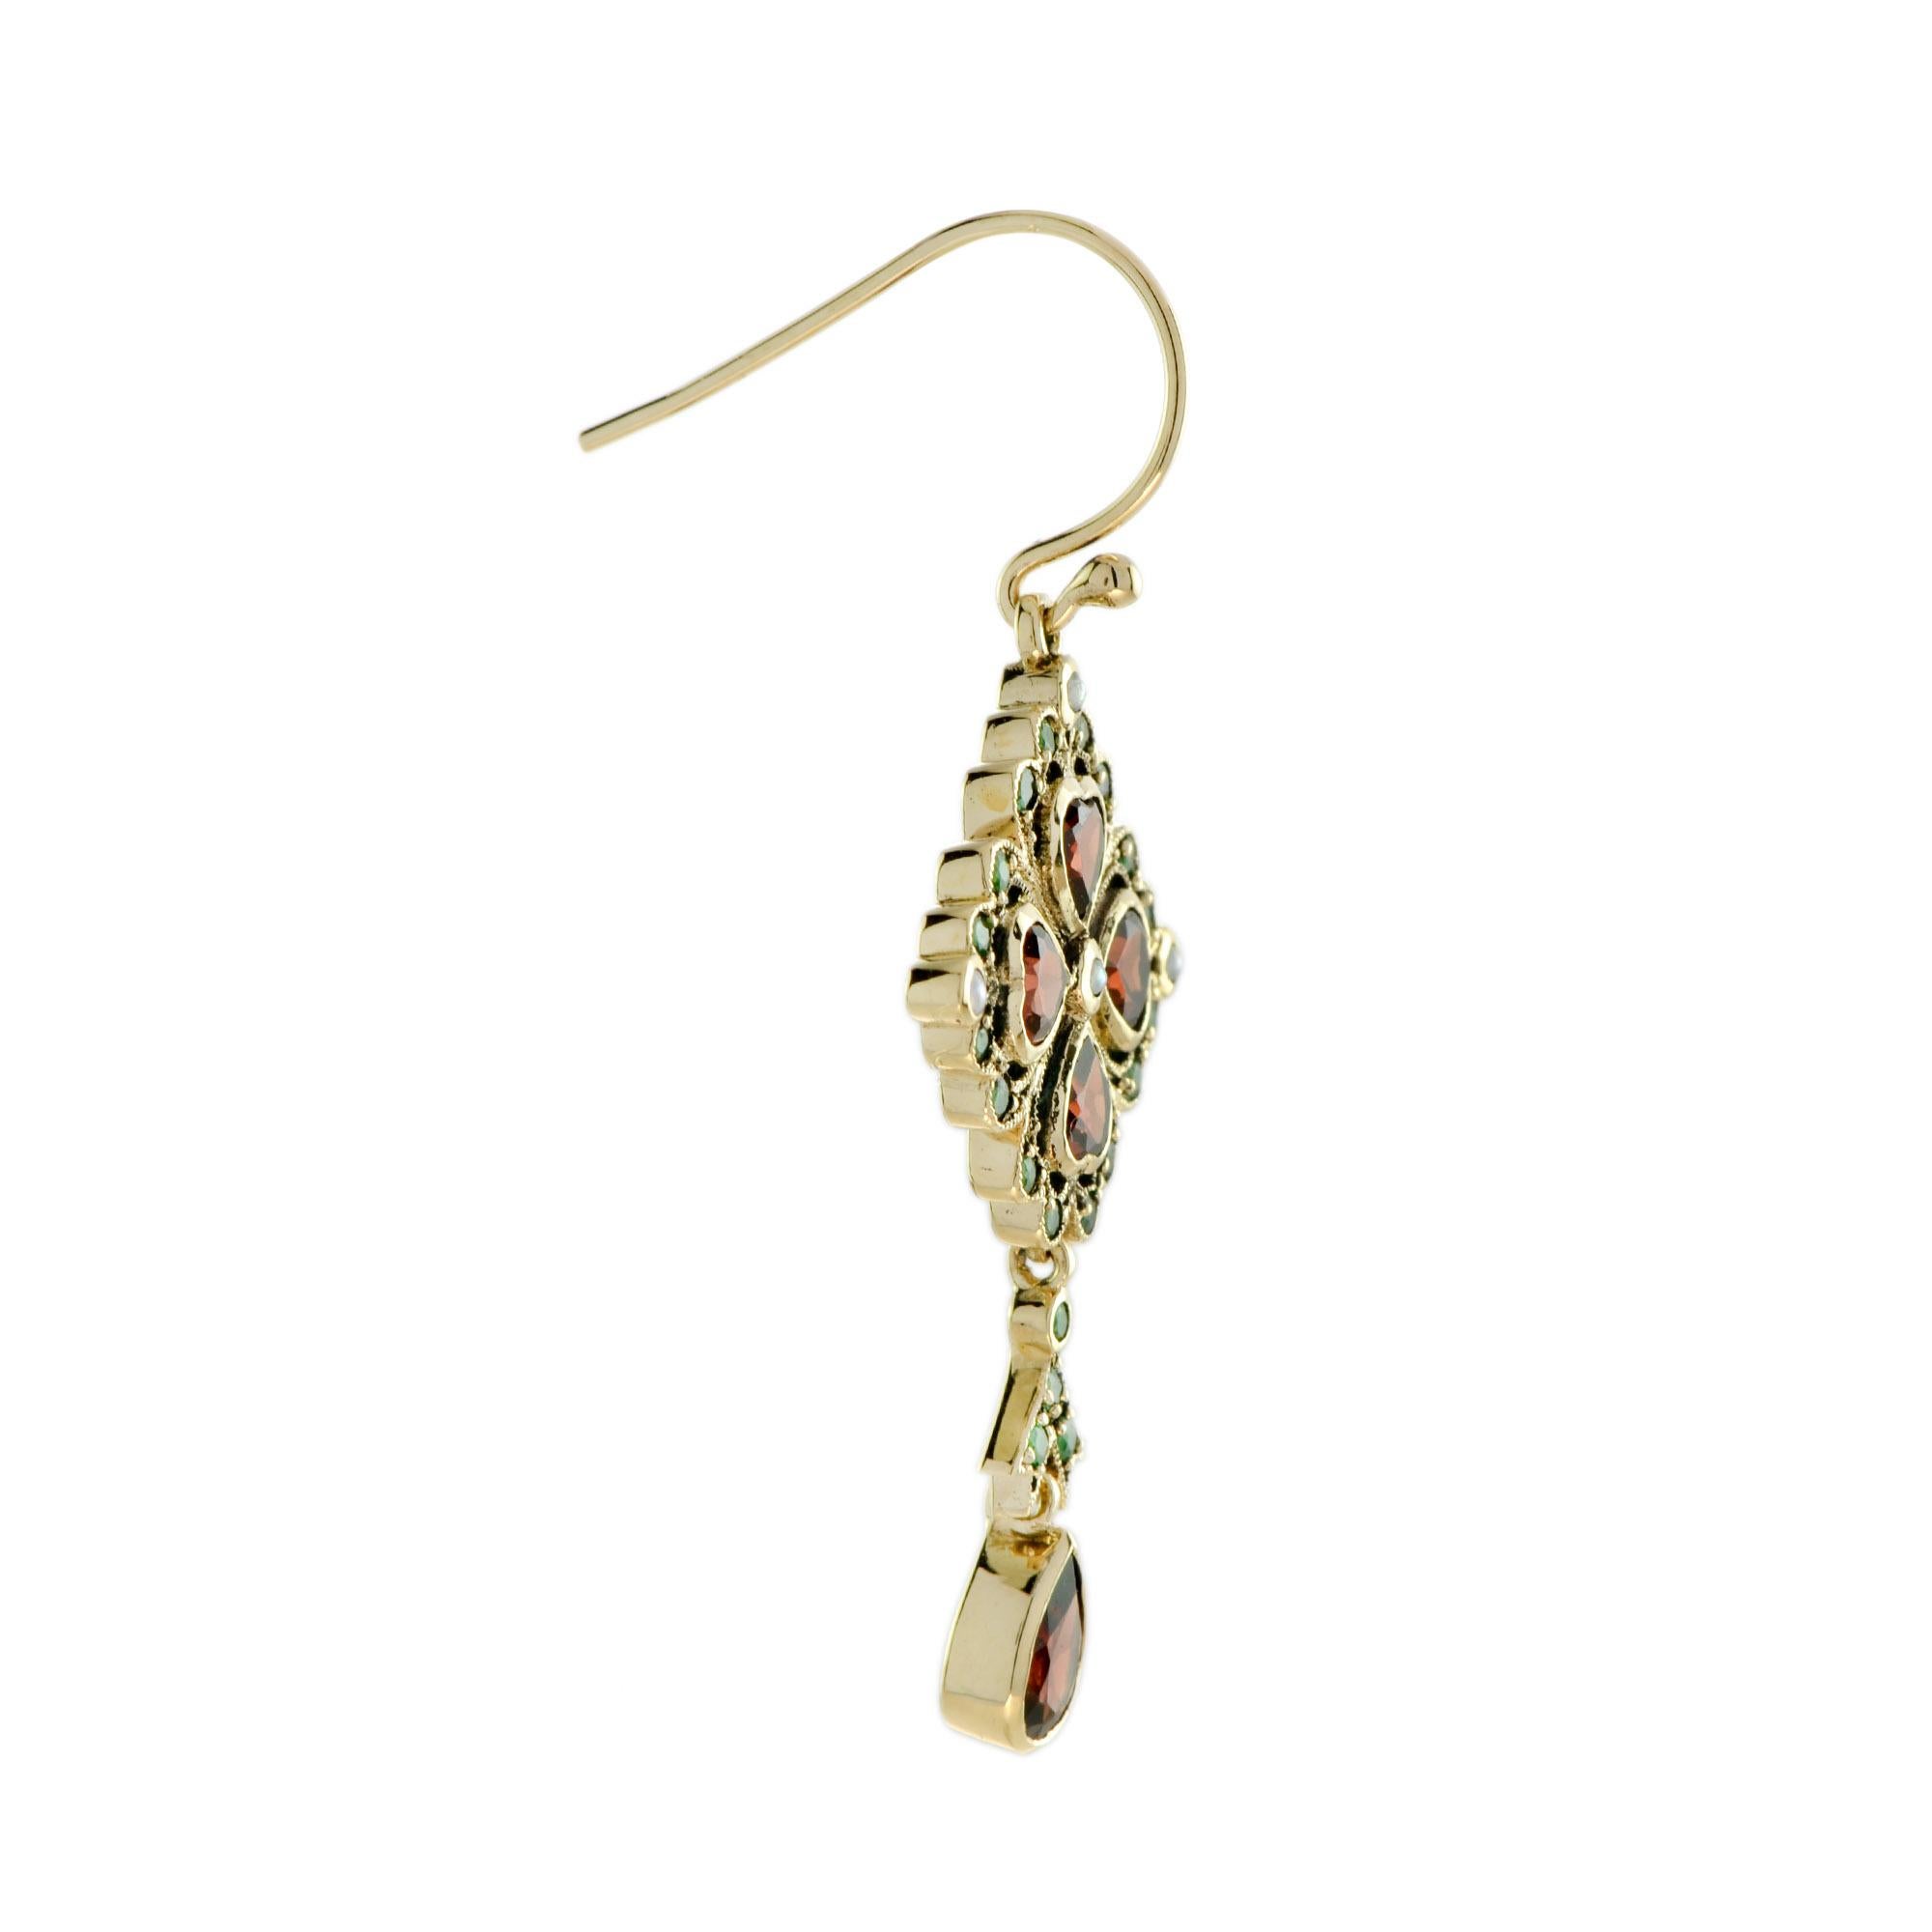 This dangle earrings are all you need on your spring day! Made in 9k yellow gold, the top part of these earrings are peal, garnet and emerald. The fusion of the yellow gold with the green and red shades of the stones makes these earrings exquisitely